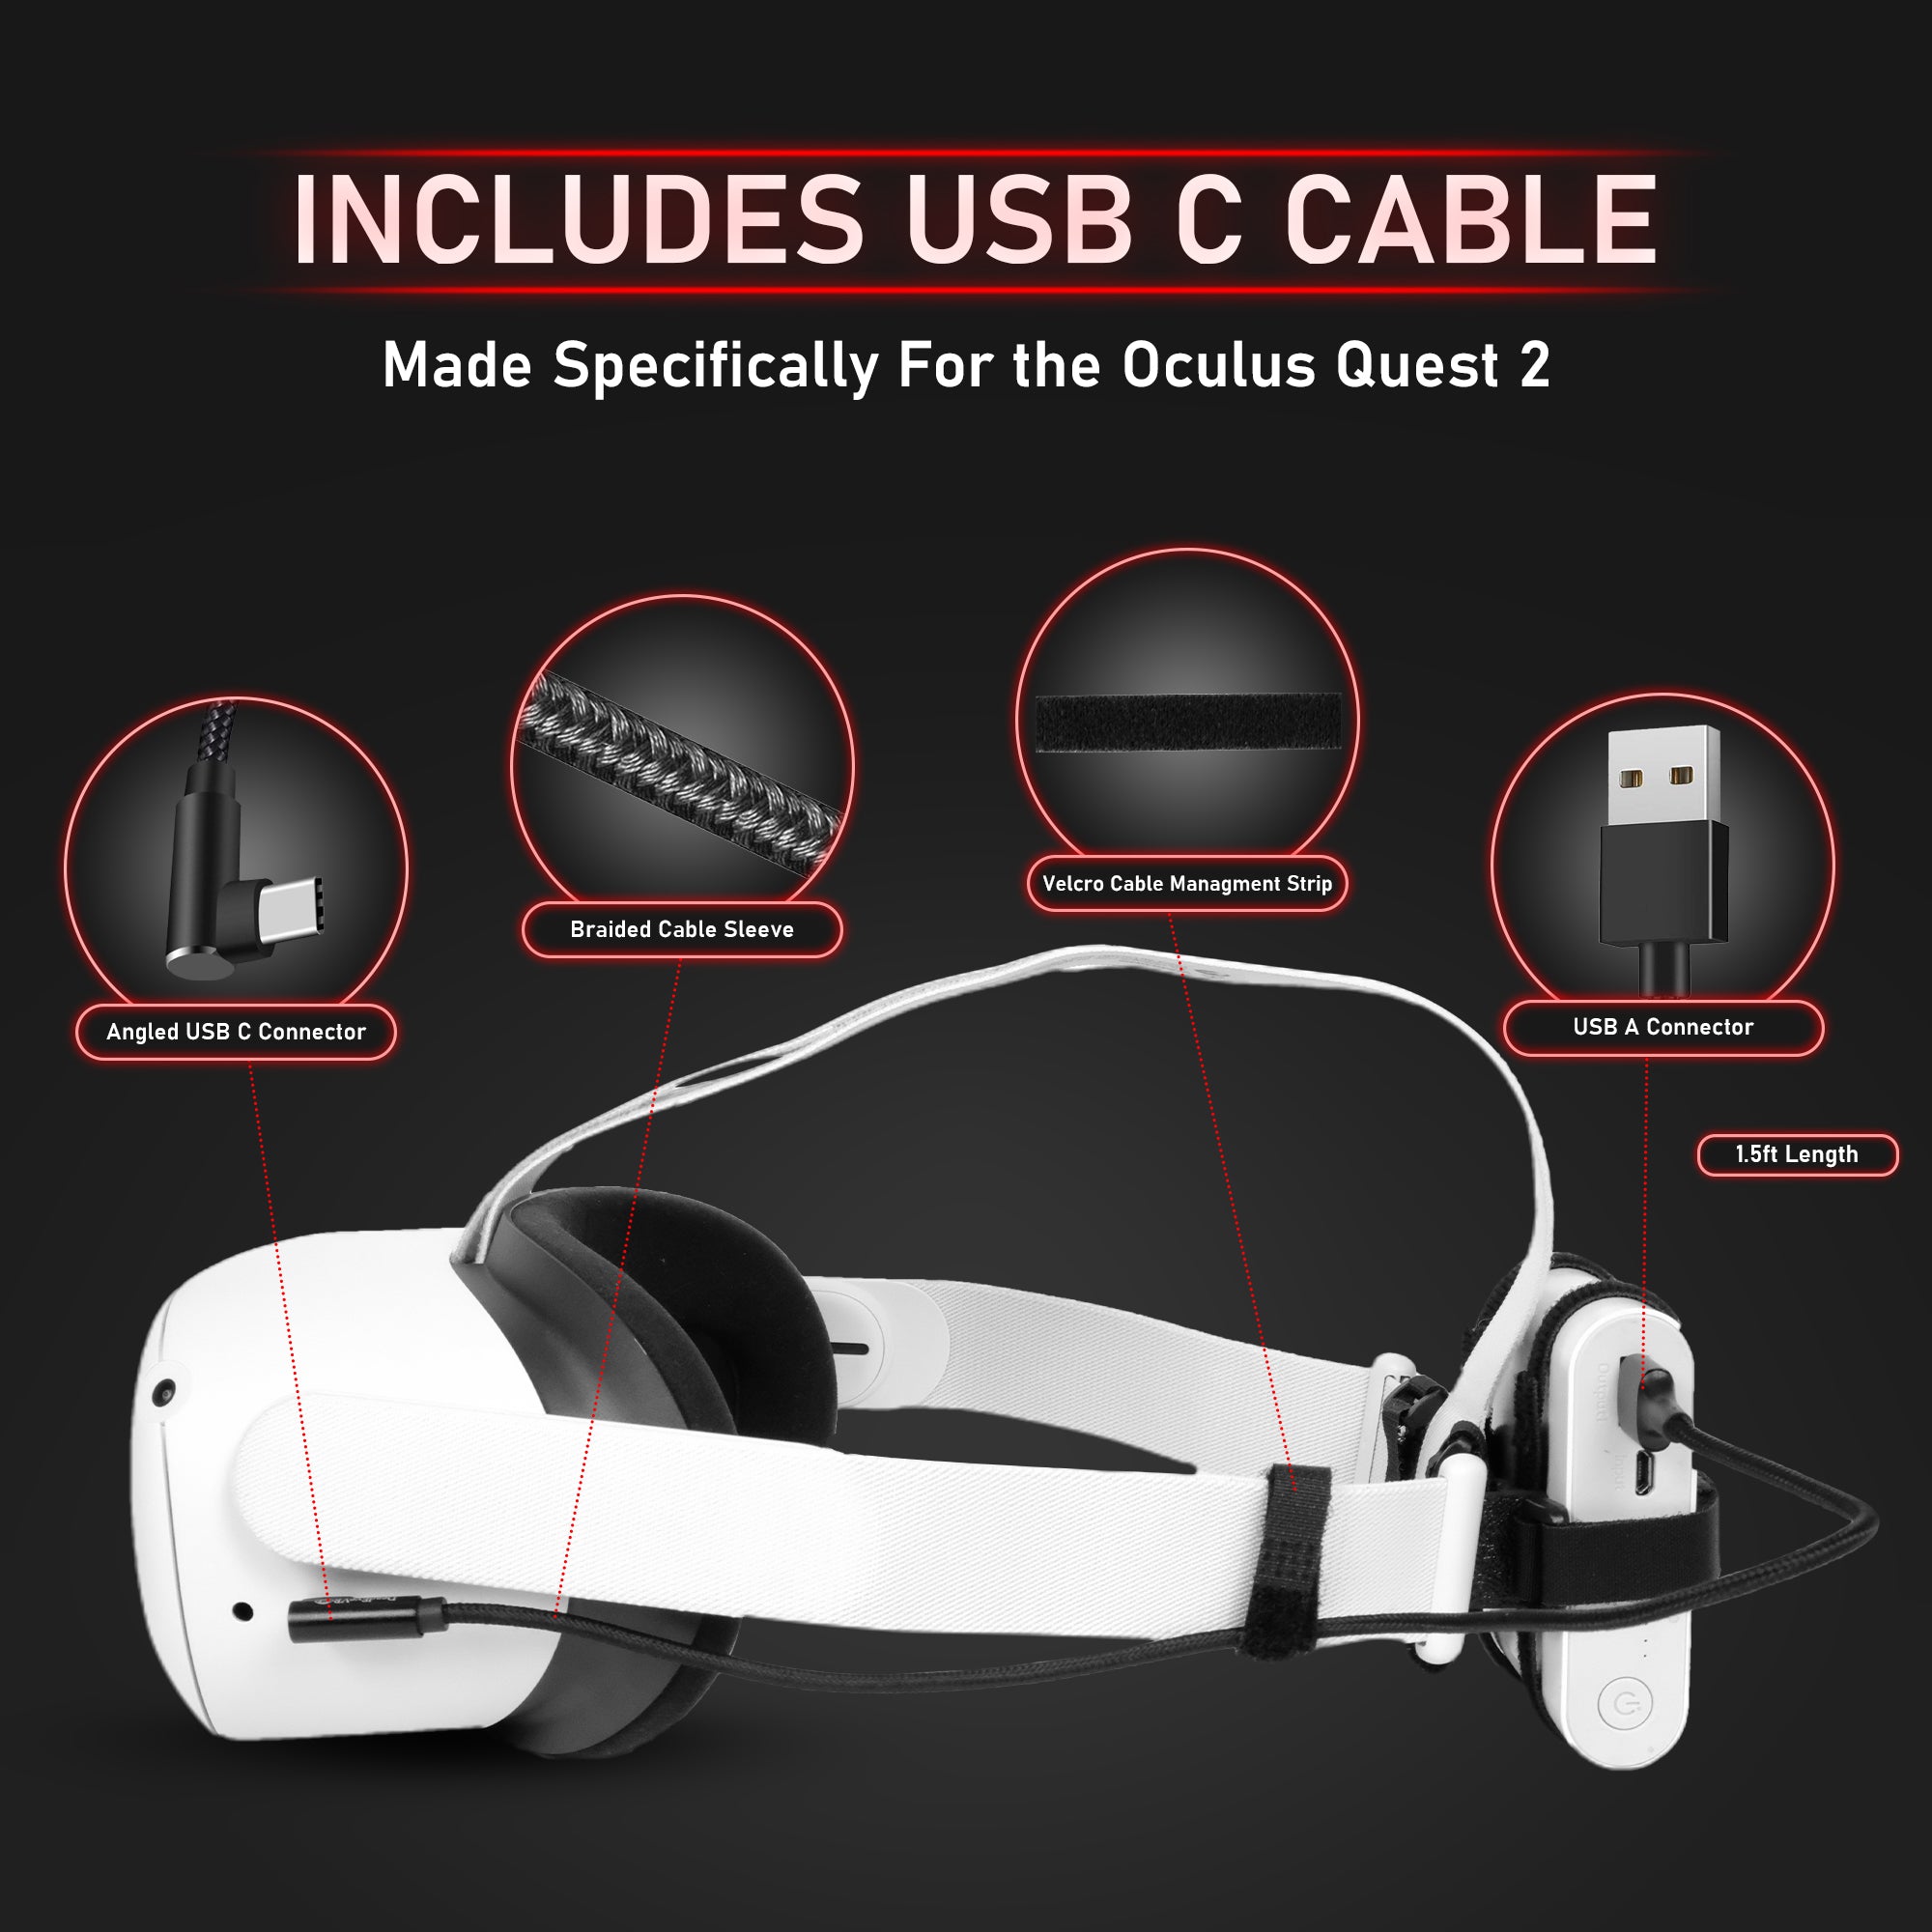 Includes USB C Cable. Made specifically for the Oculus Quest 2. Angled USB C Connector. Braided Cable SLeeve. Velcro Cable Management Strip. USB A Connector. 1.5ft Length